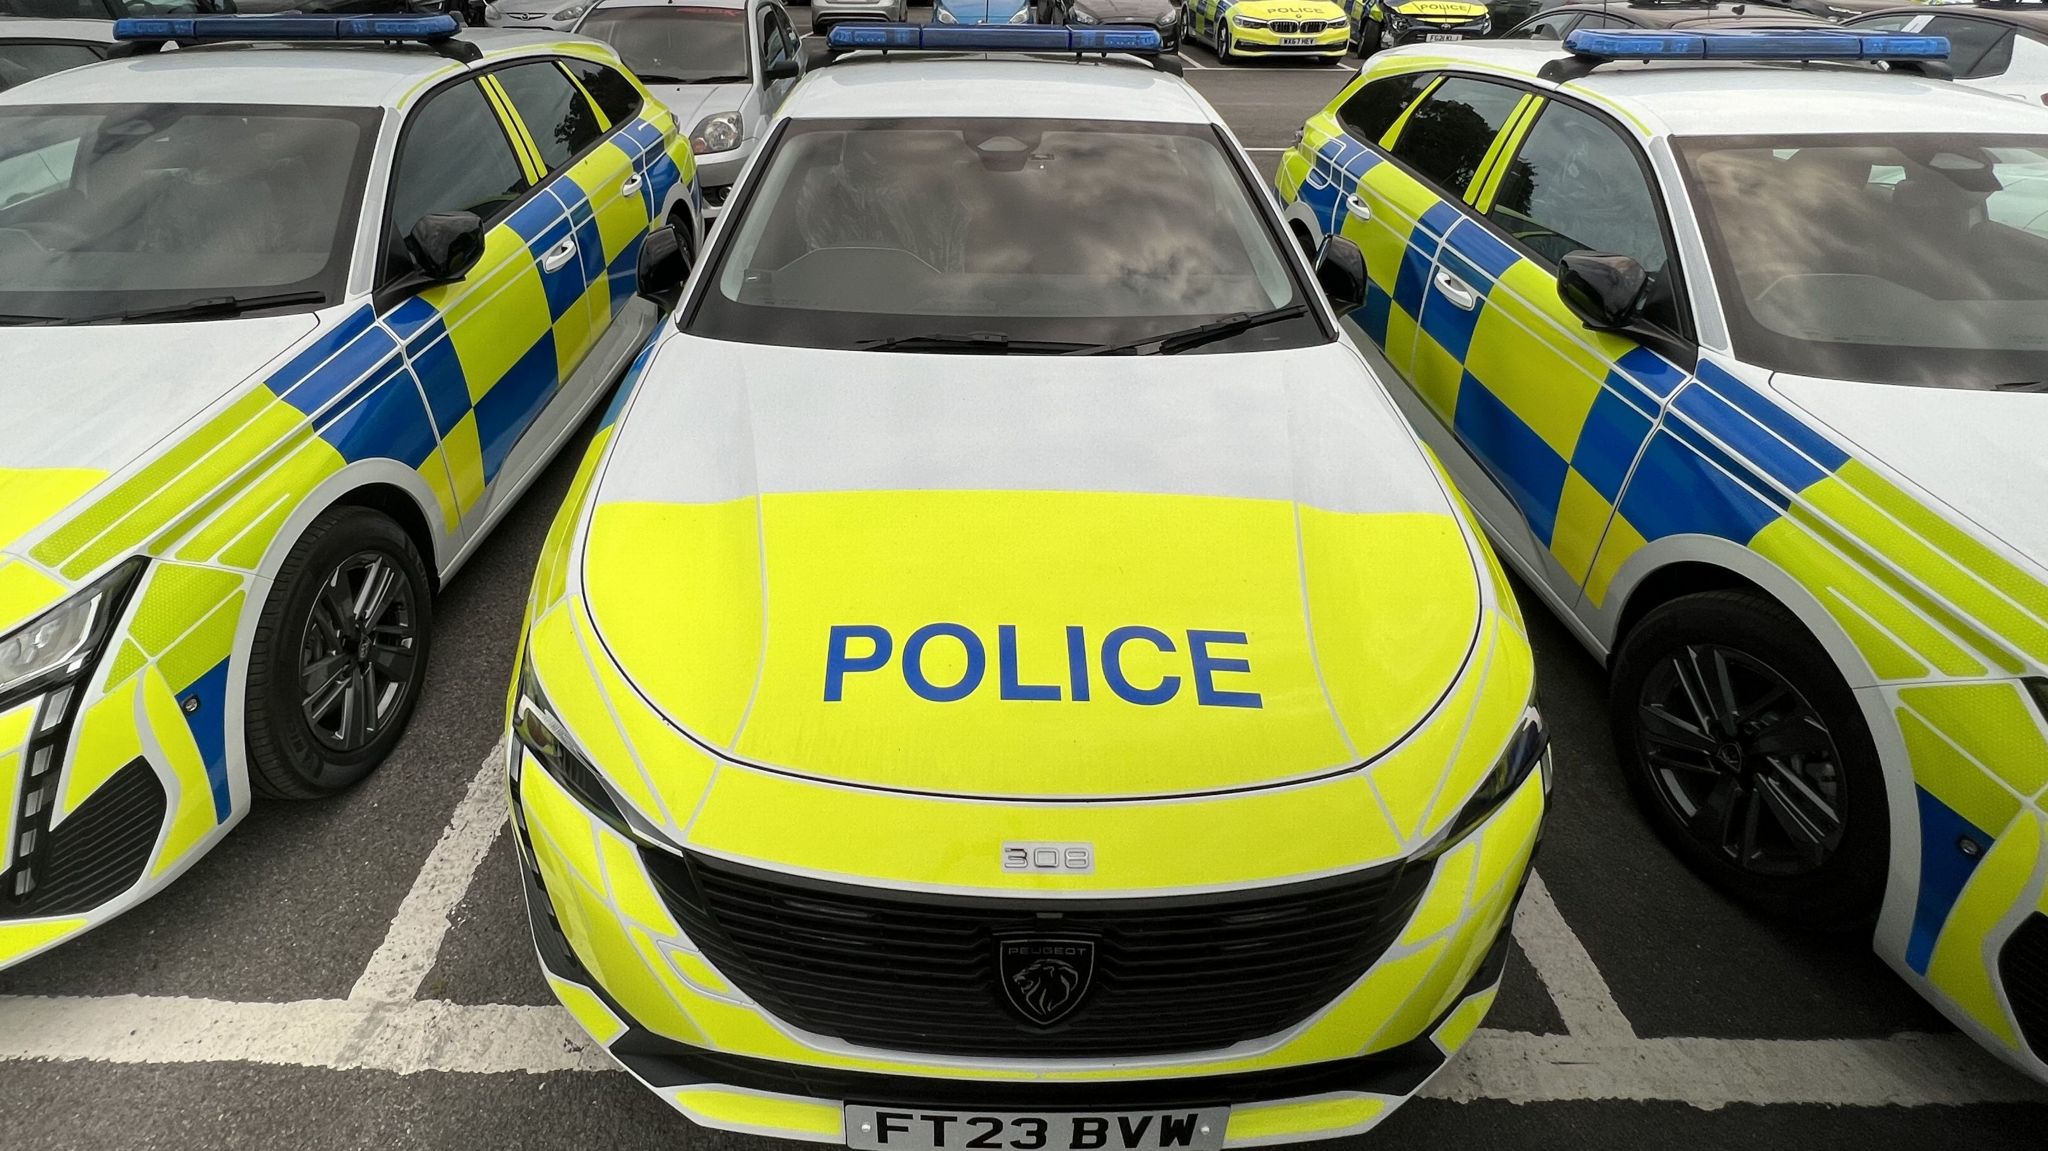 Wiltshire Police cars parked next to each other